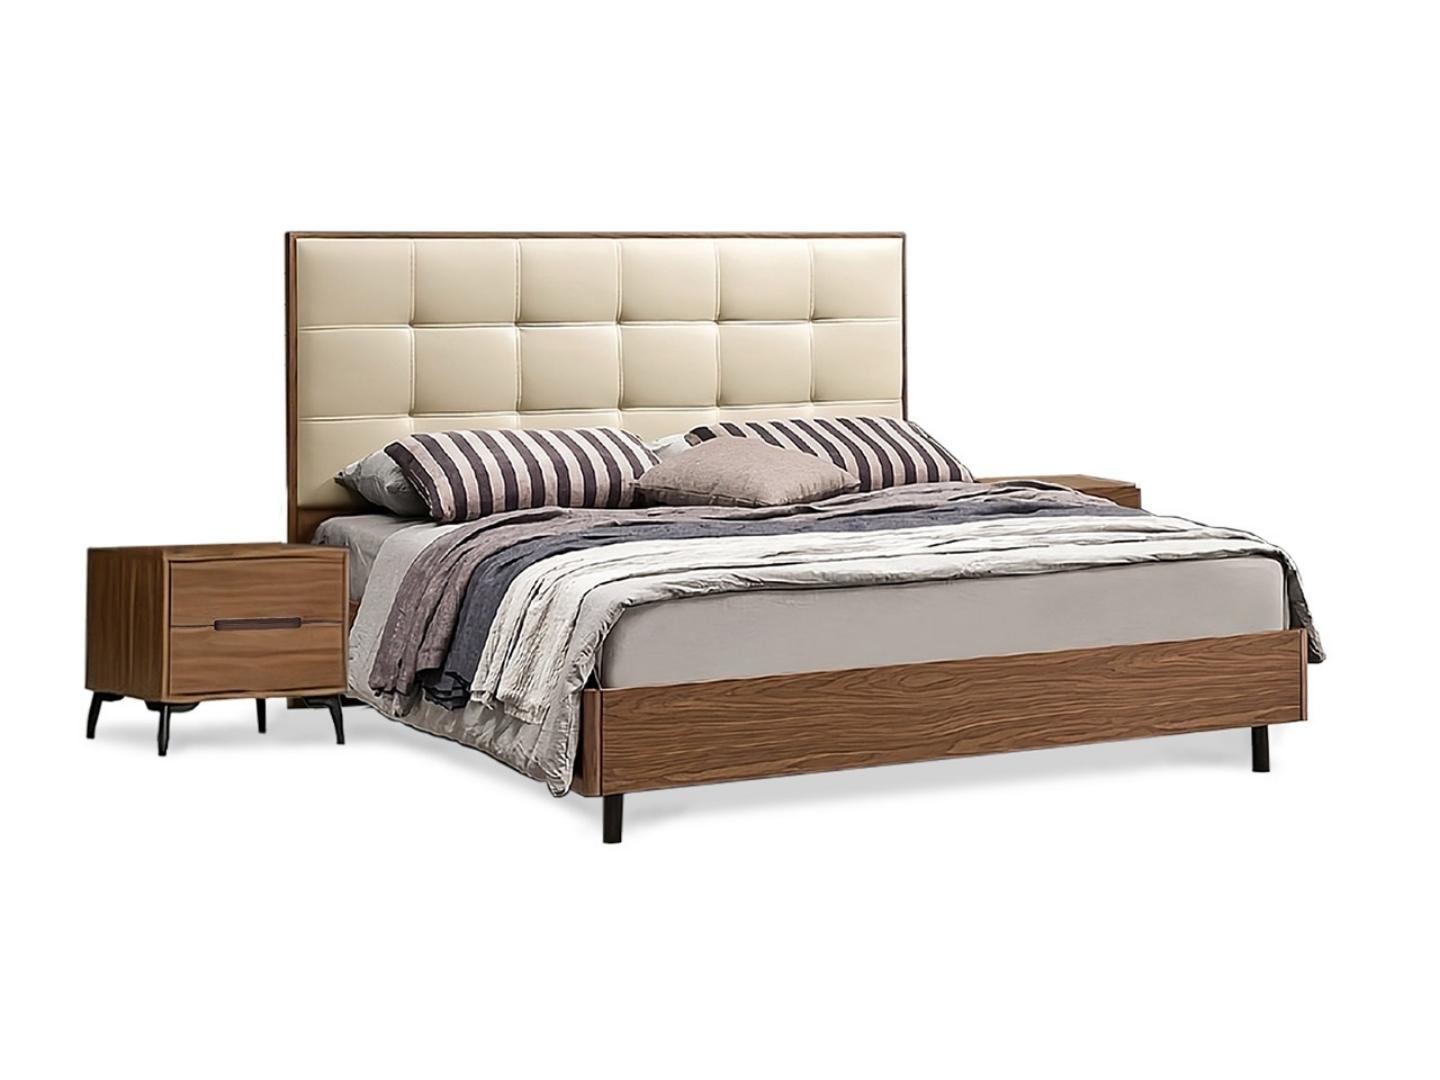 SOLID WOOD BEDFRAME, WITH beige HEADBOARD Bonded leather - Lux Furniture